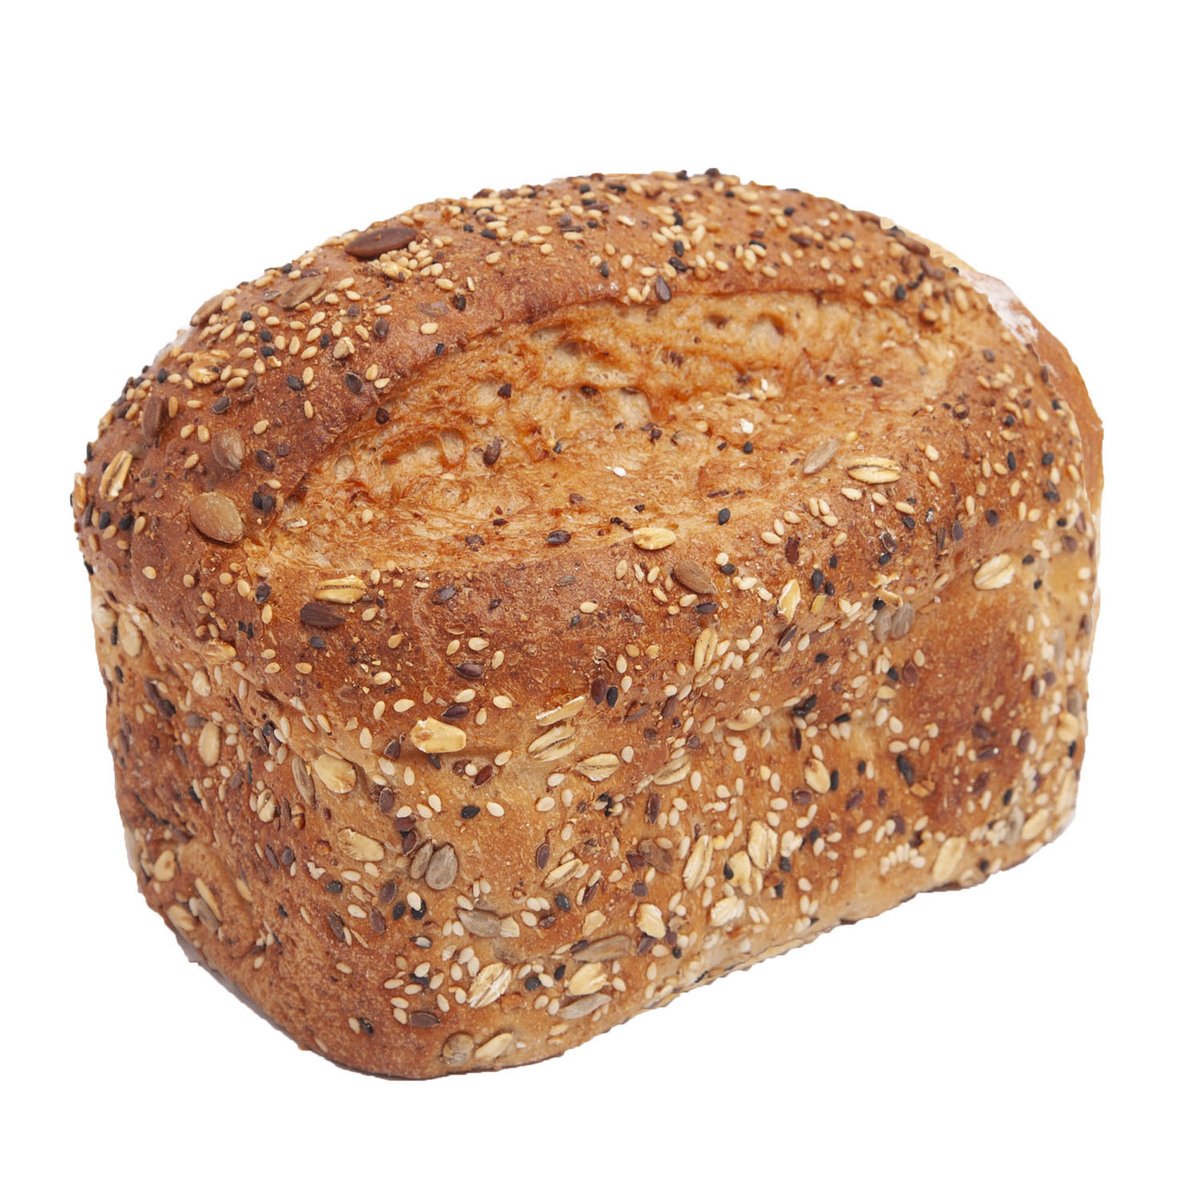 7 Cereal Bread (Clean Label) 1pc